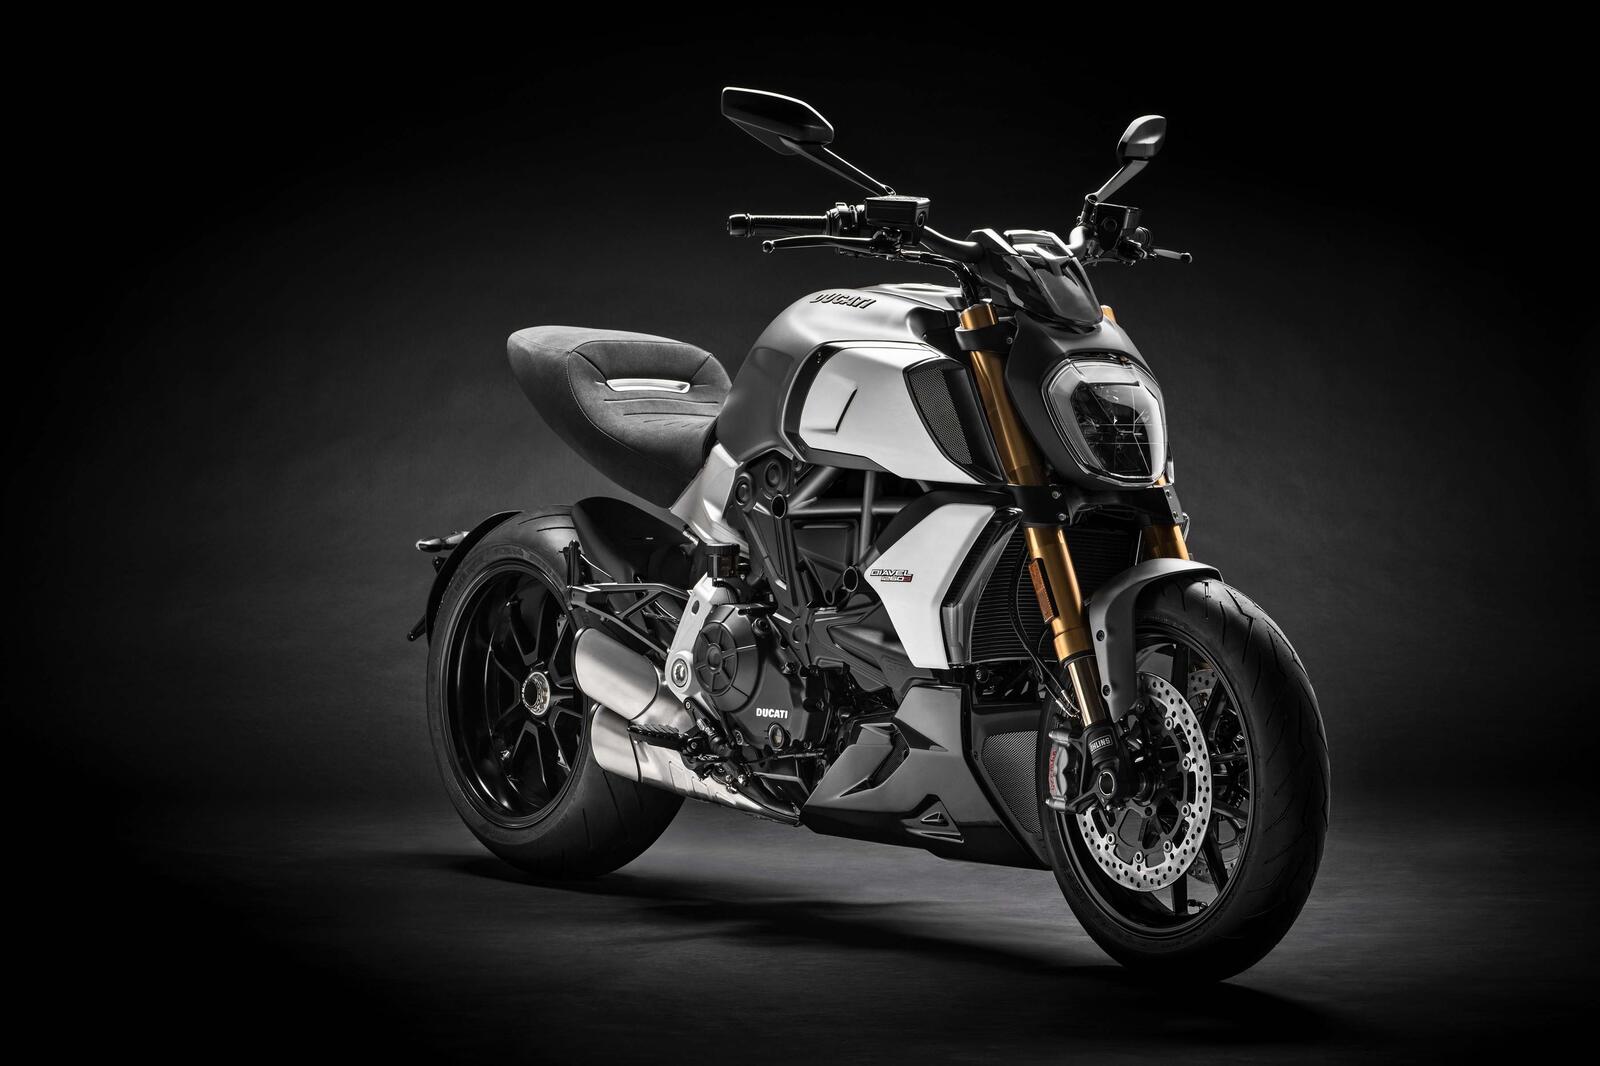 Wallpapers Ducati Diavel in 1260 s white motorcycle on the desktop